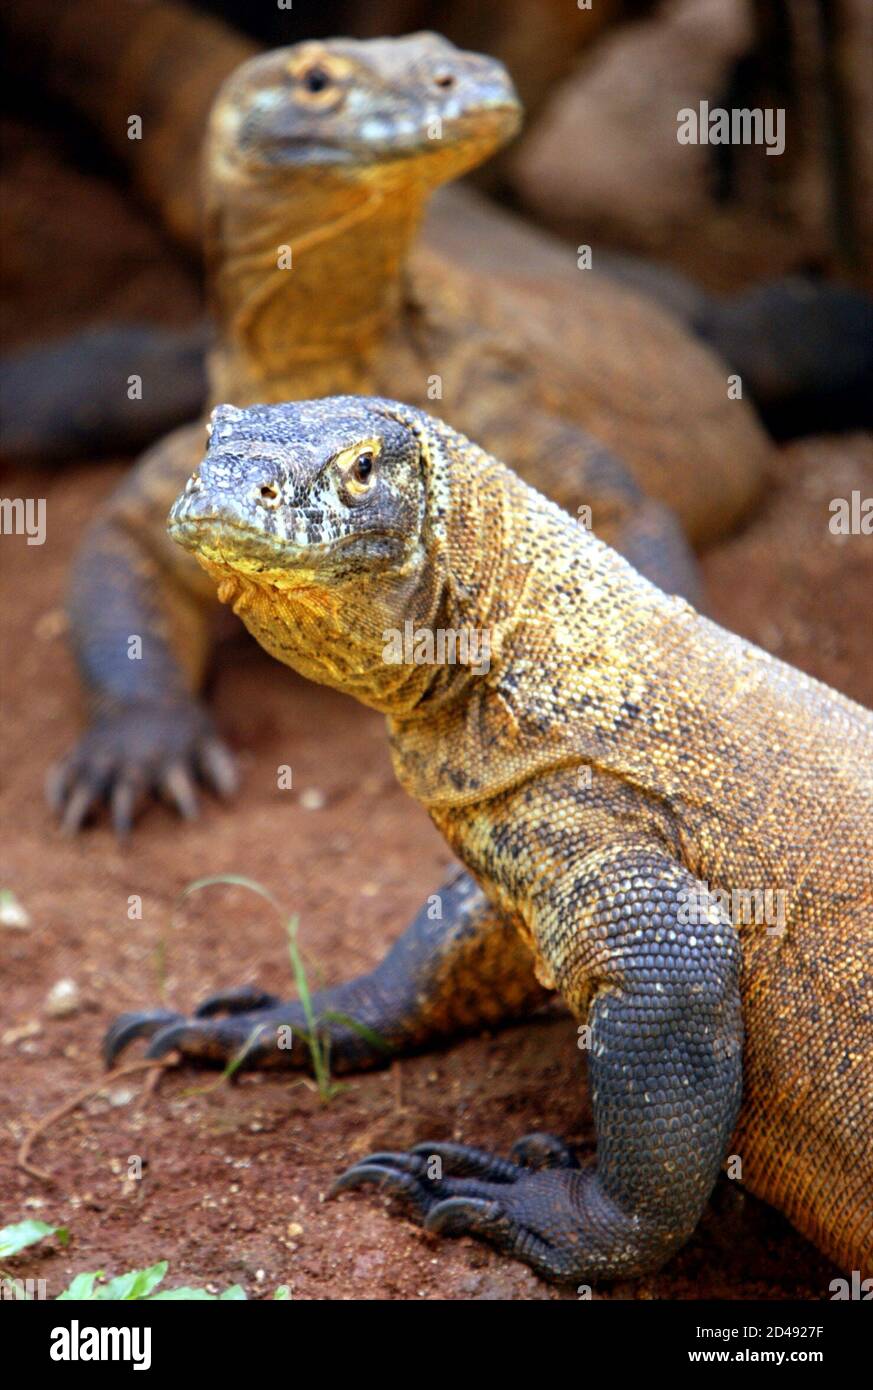 Two young Komodo dragons or Varanus komodoensis, the world's largest living  reptile and indigenous to only a few small Indonesian islands, are seen in  Ragunan Zoo in Jakarta March 16, 2004. The